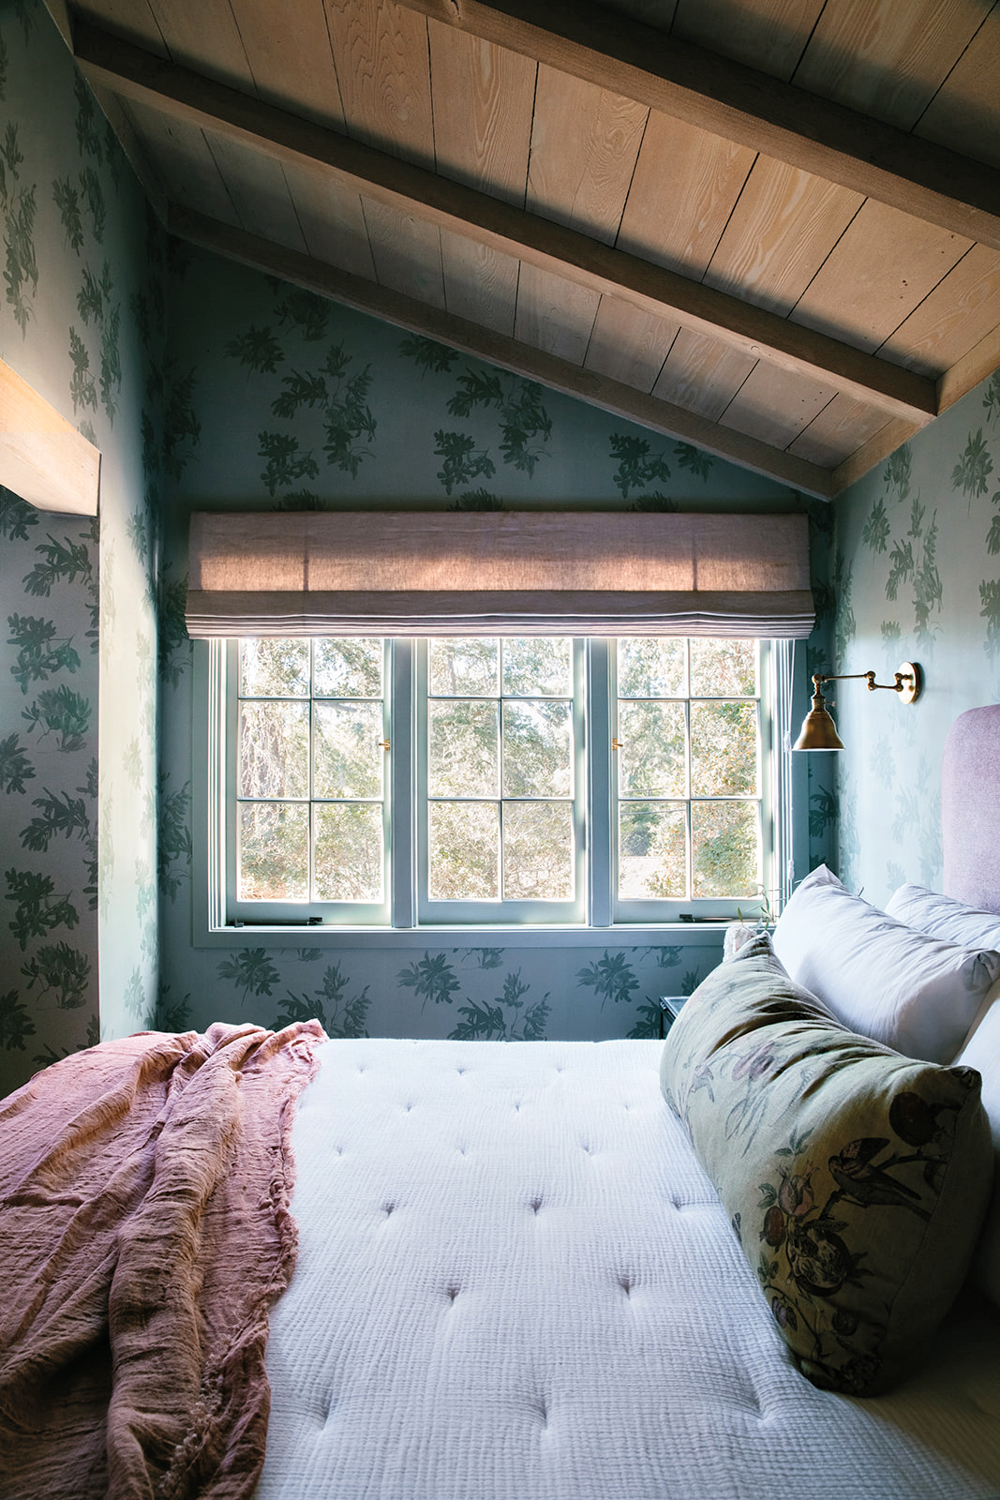 An attic bedroom with a blue patterned wallpaper